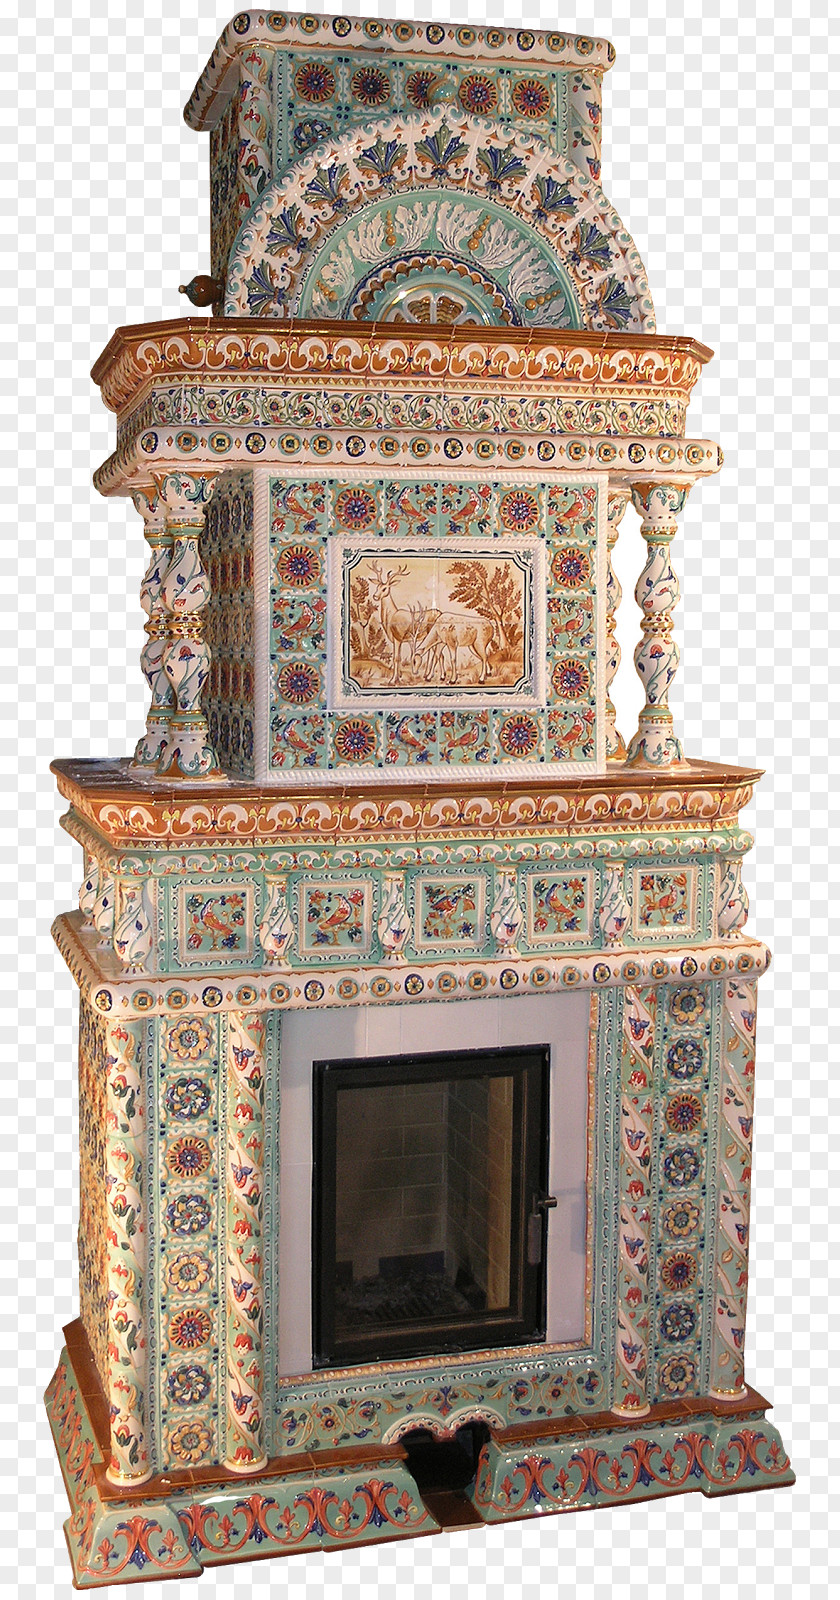 Antique Shrine Carving Fireplace PNG